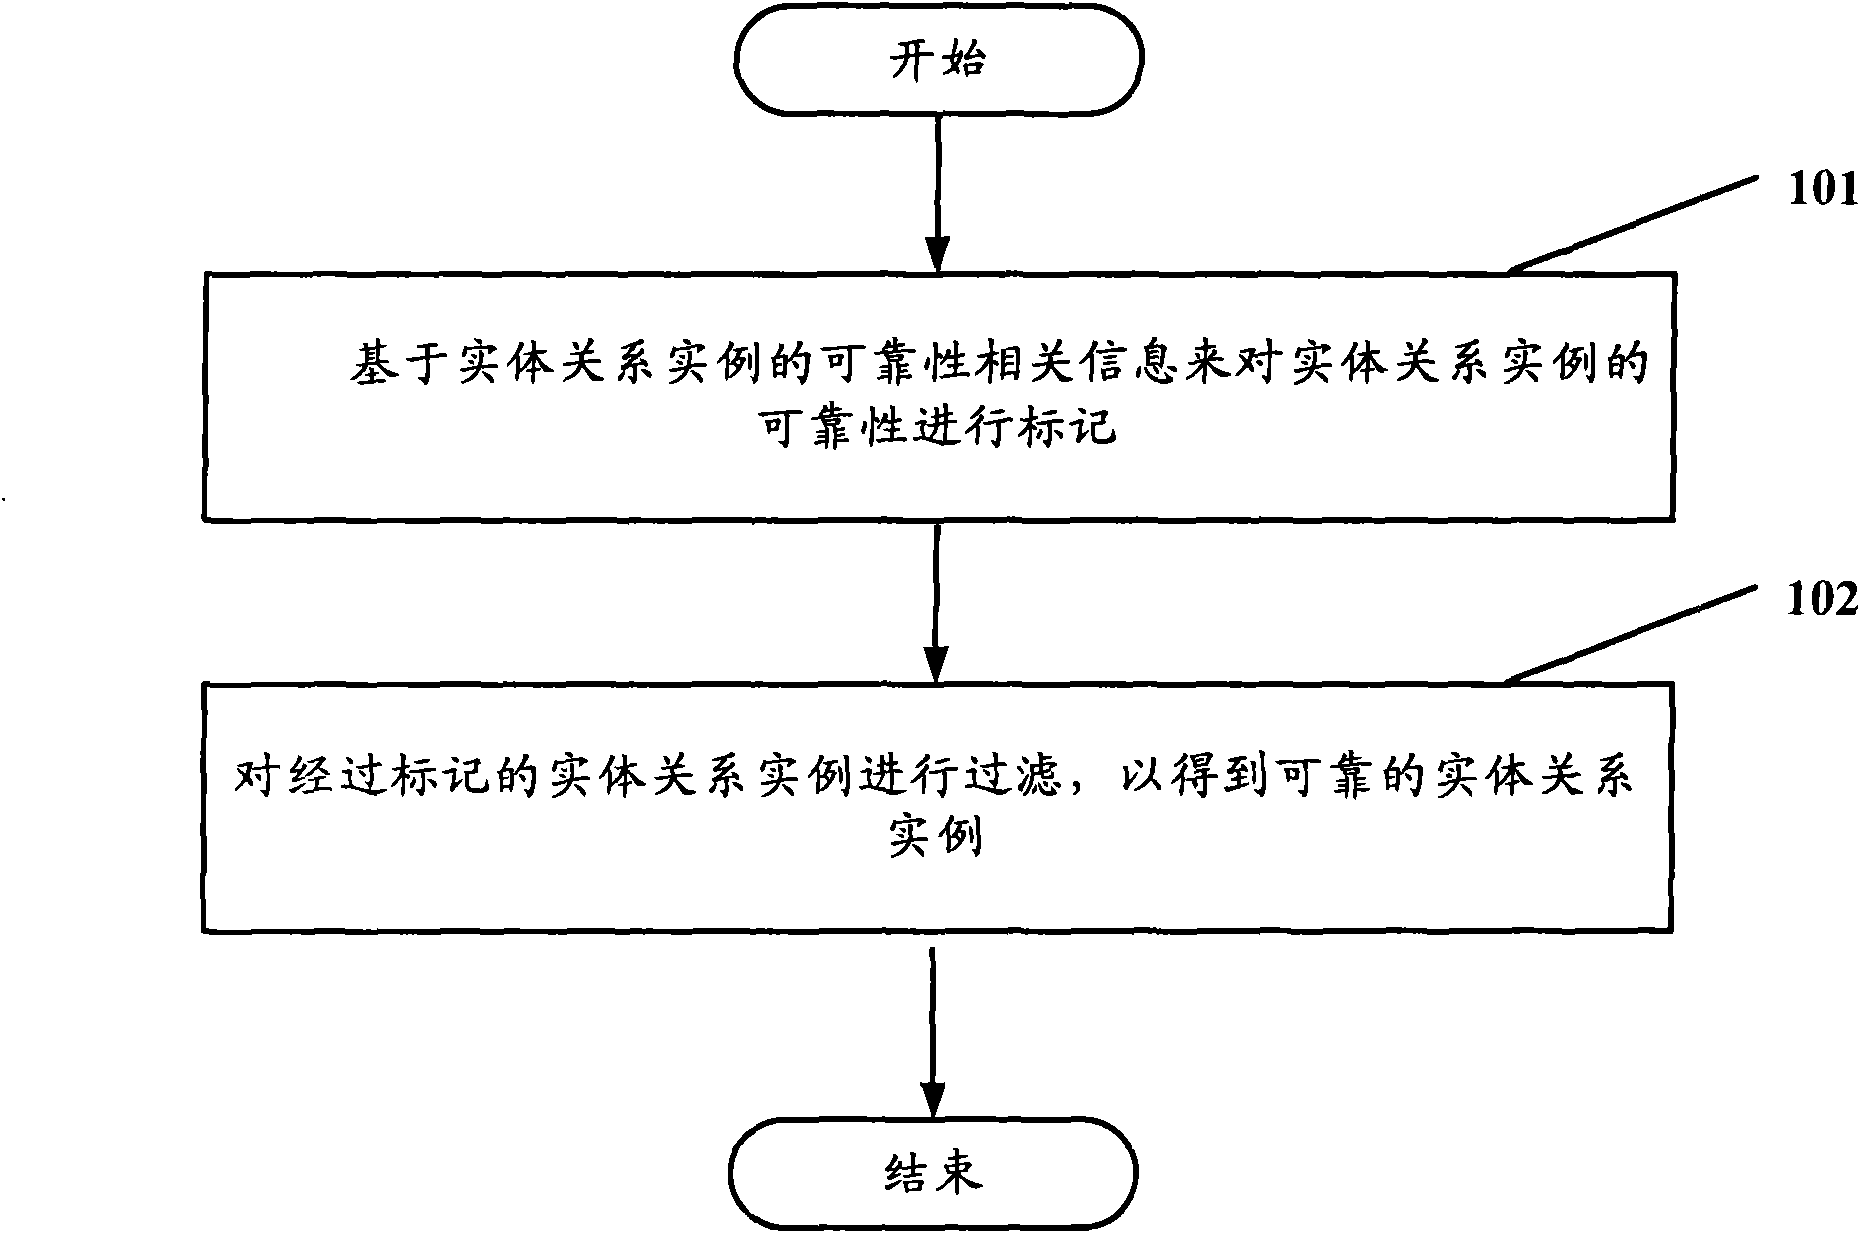 Method and equipment for filtering entity relationship instance